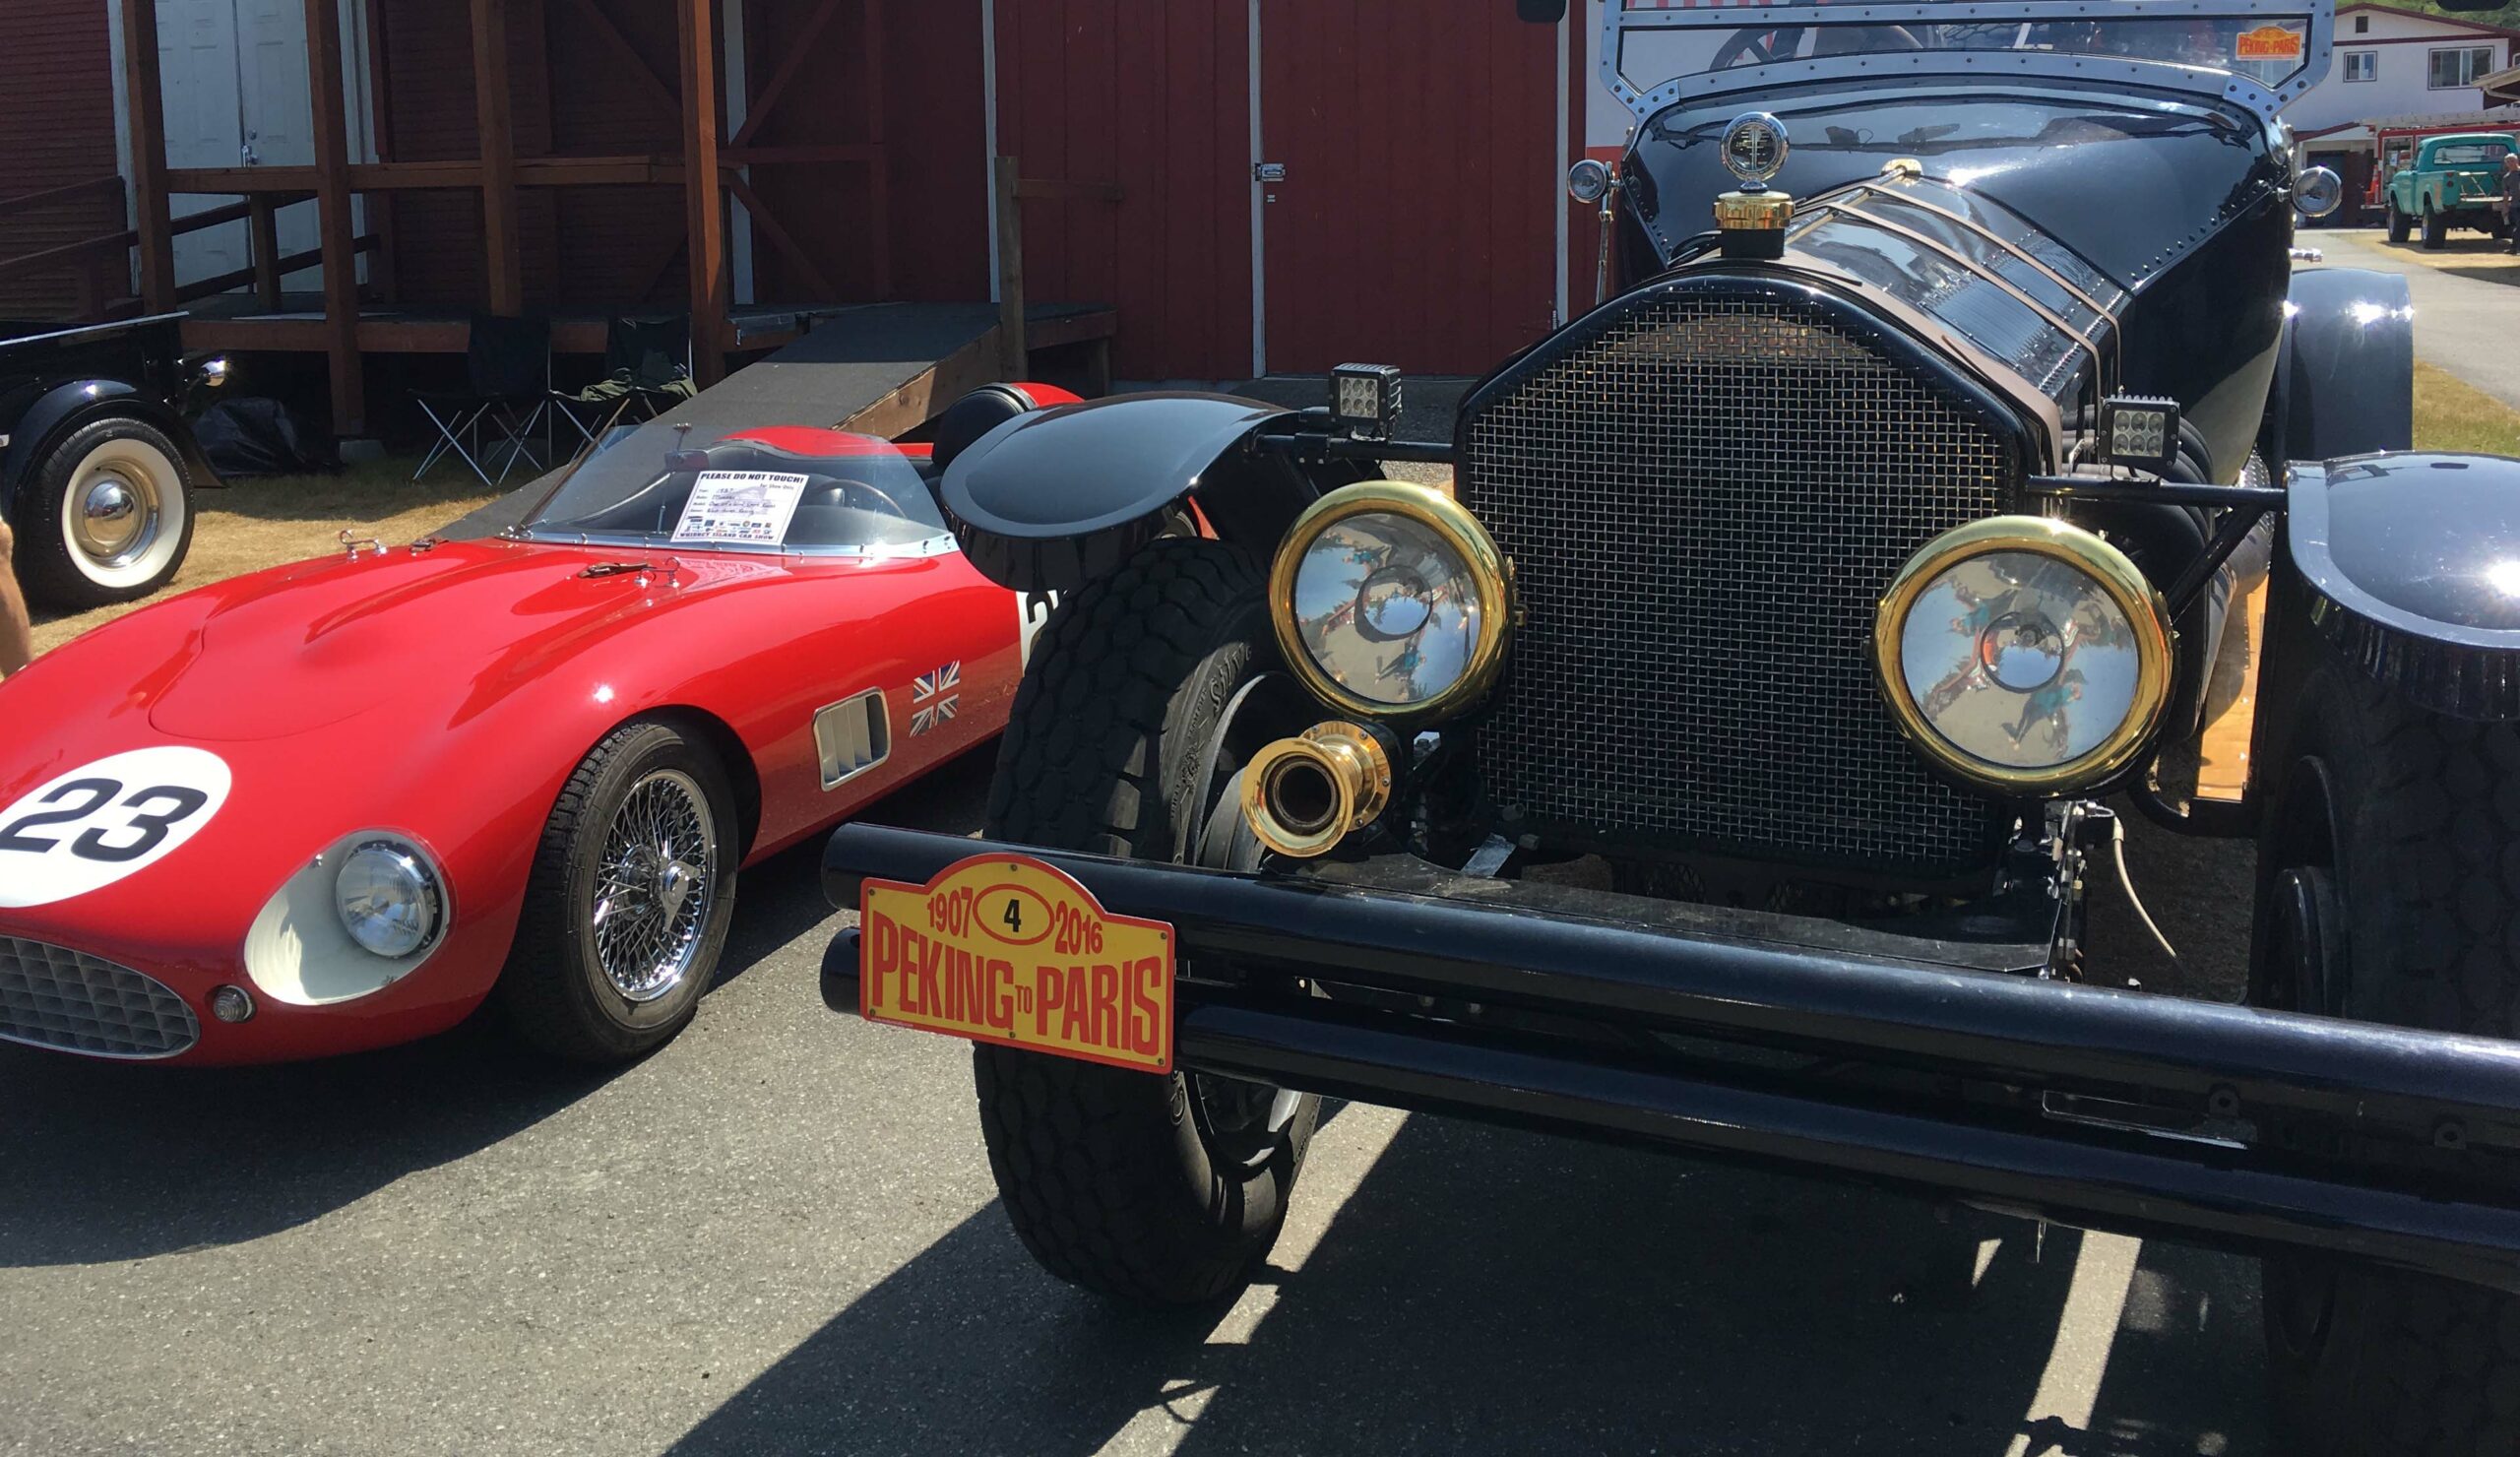 Whidbey Island Car Show